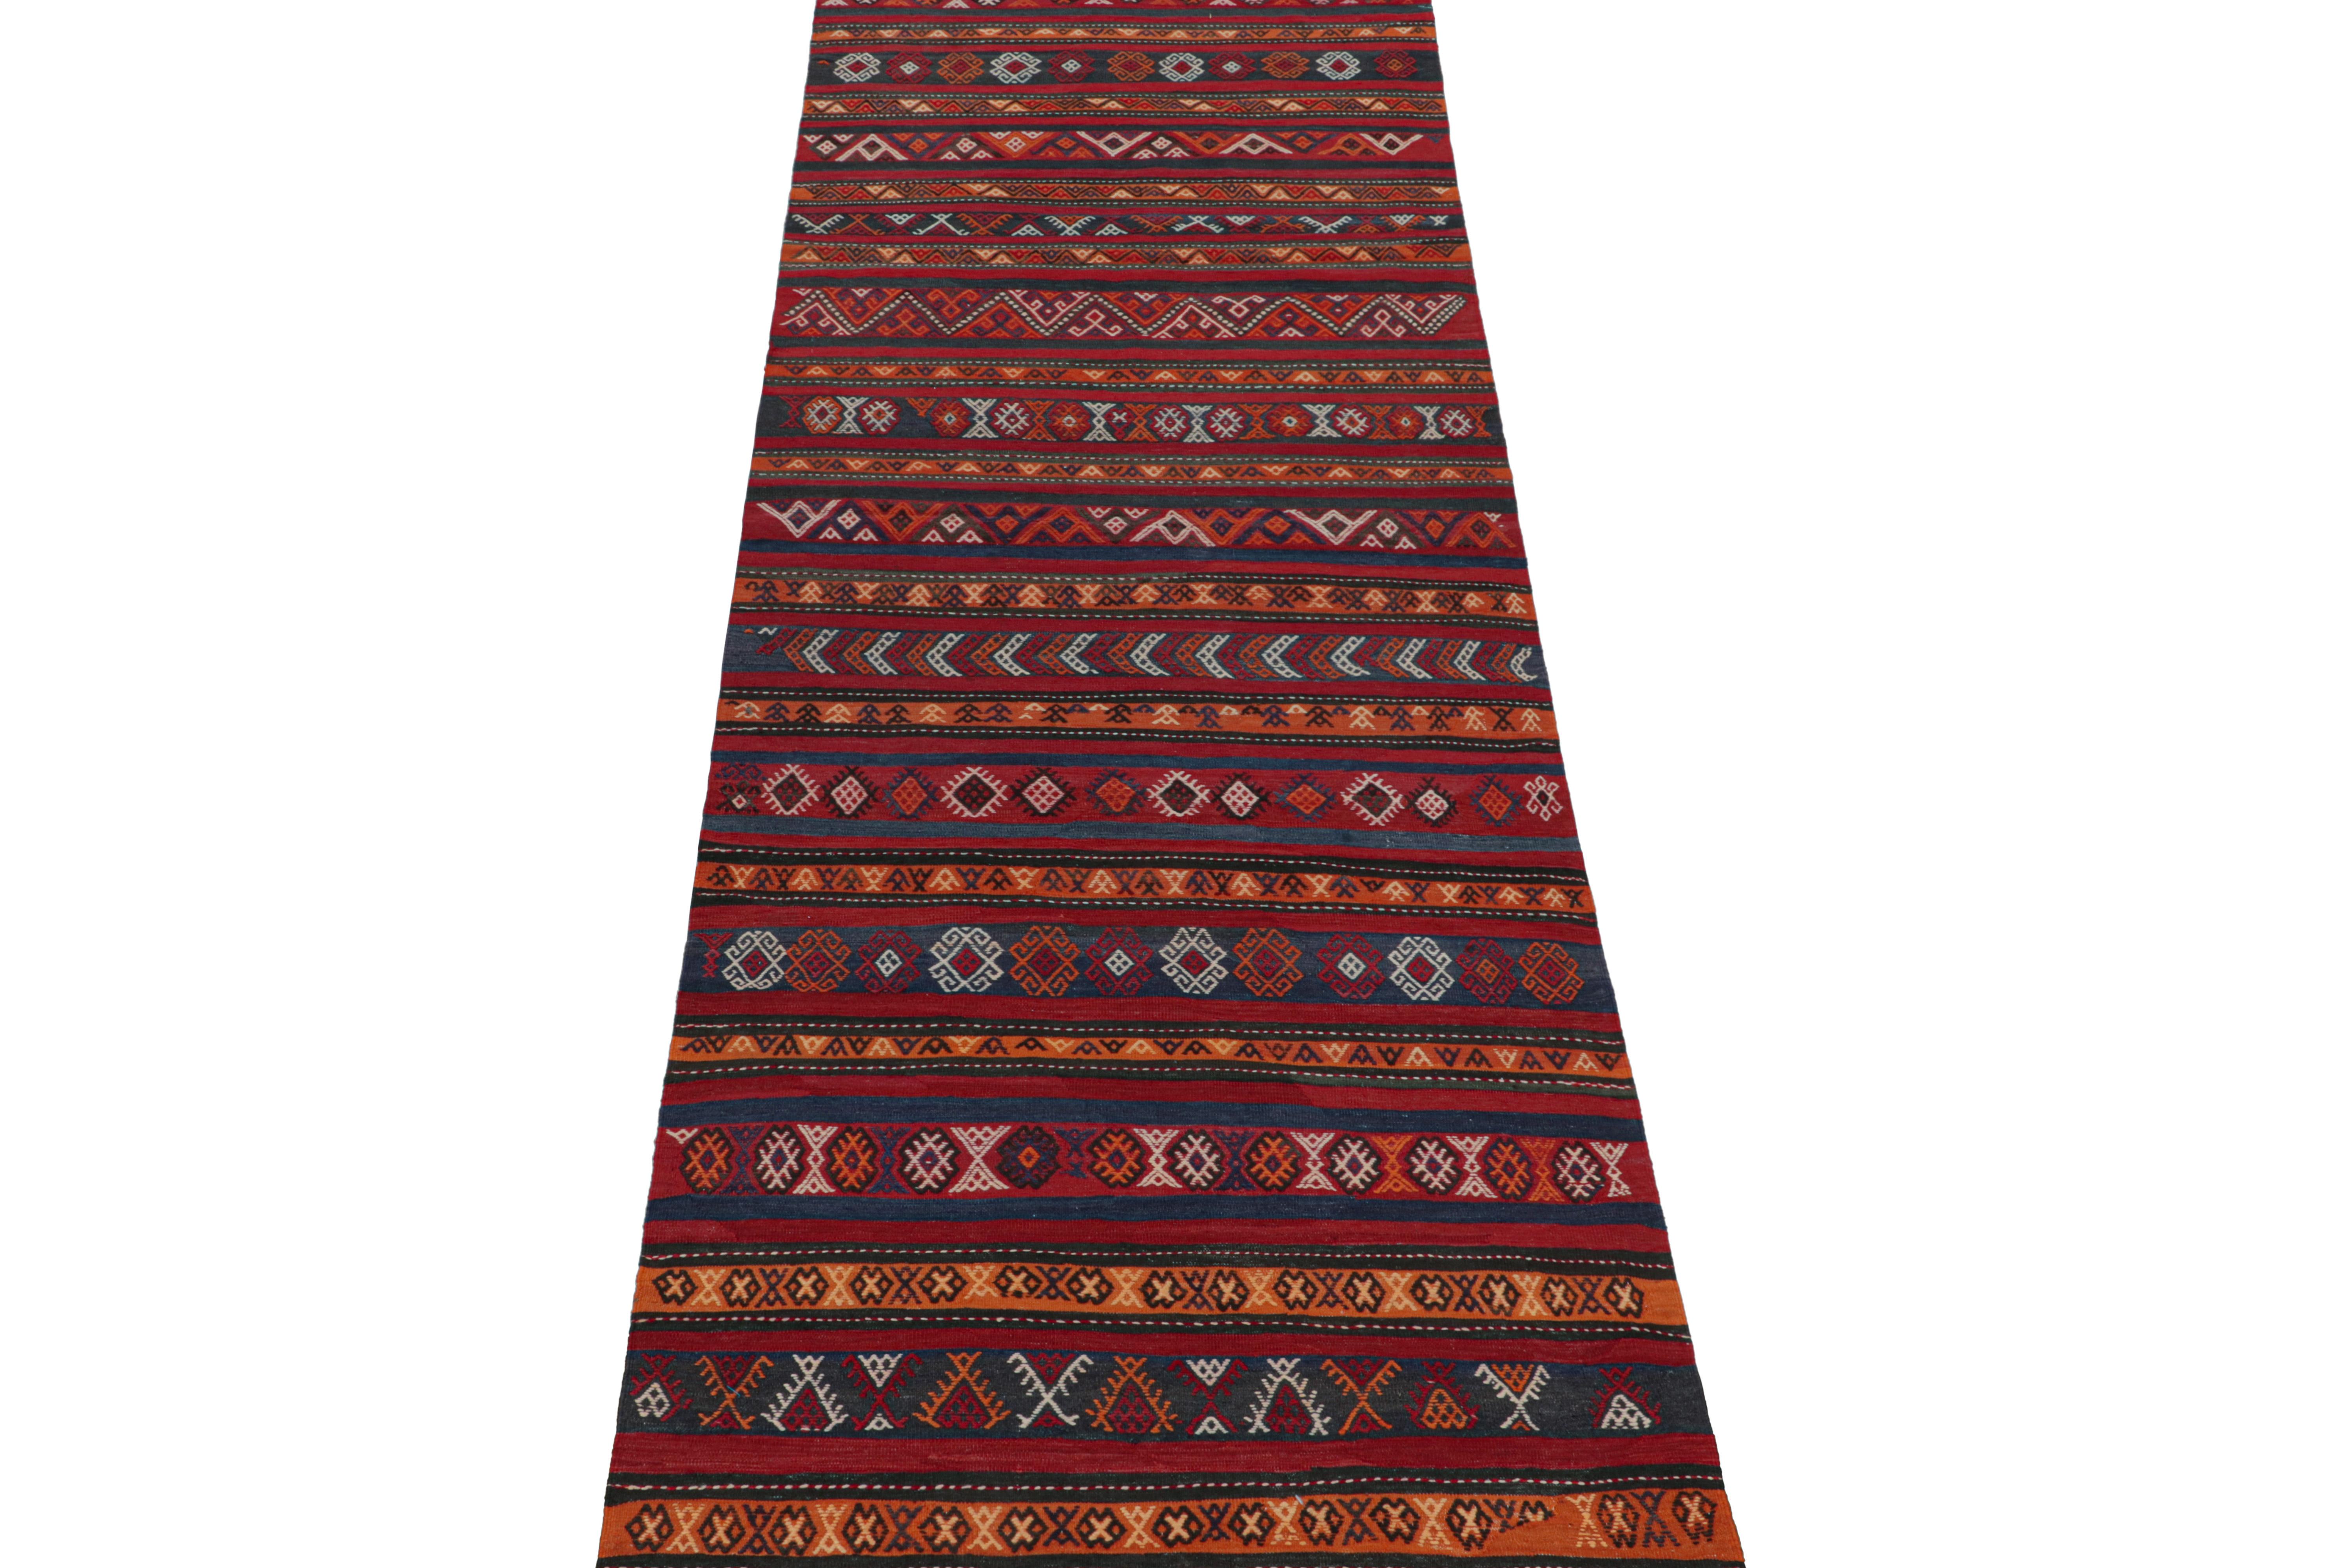 Vintage Shahsavan Persian Kilim in Red with Geometric Patterns In Good Condition For Sale In Long Island City, NY